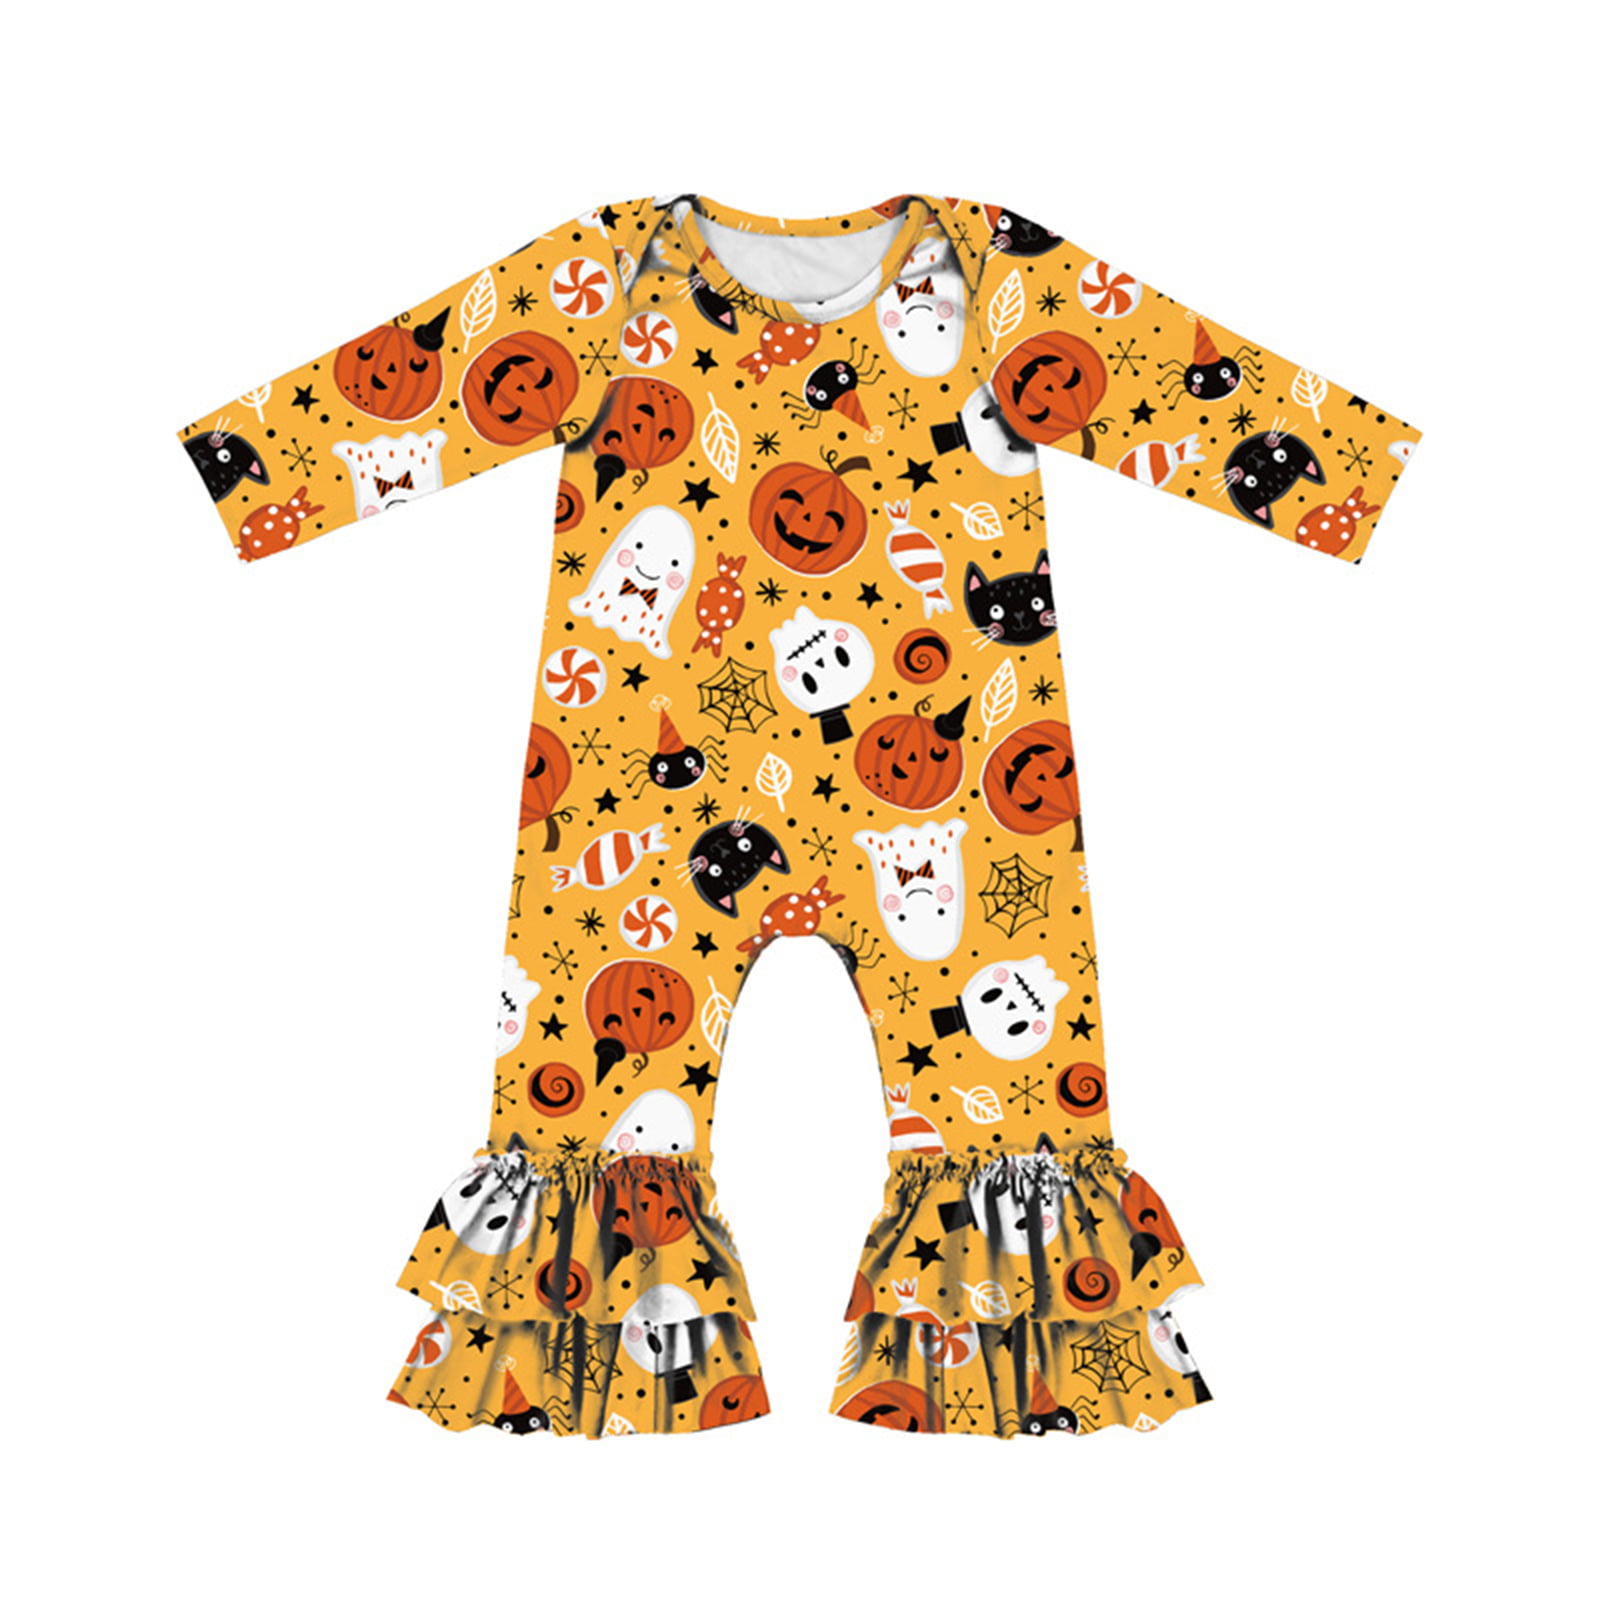 Newborn Baby Boy Toddler Girl Long Sleeve Jumpsuit Floral Romper Bodysuit Outfit 